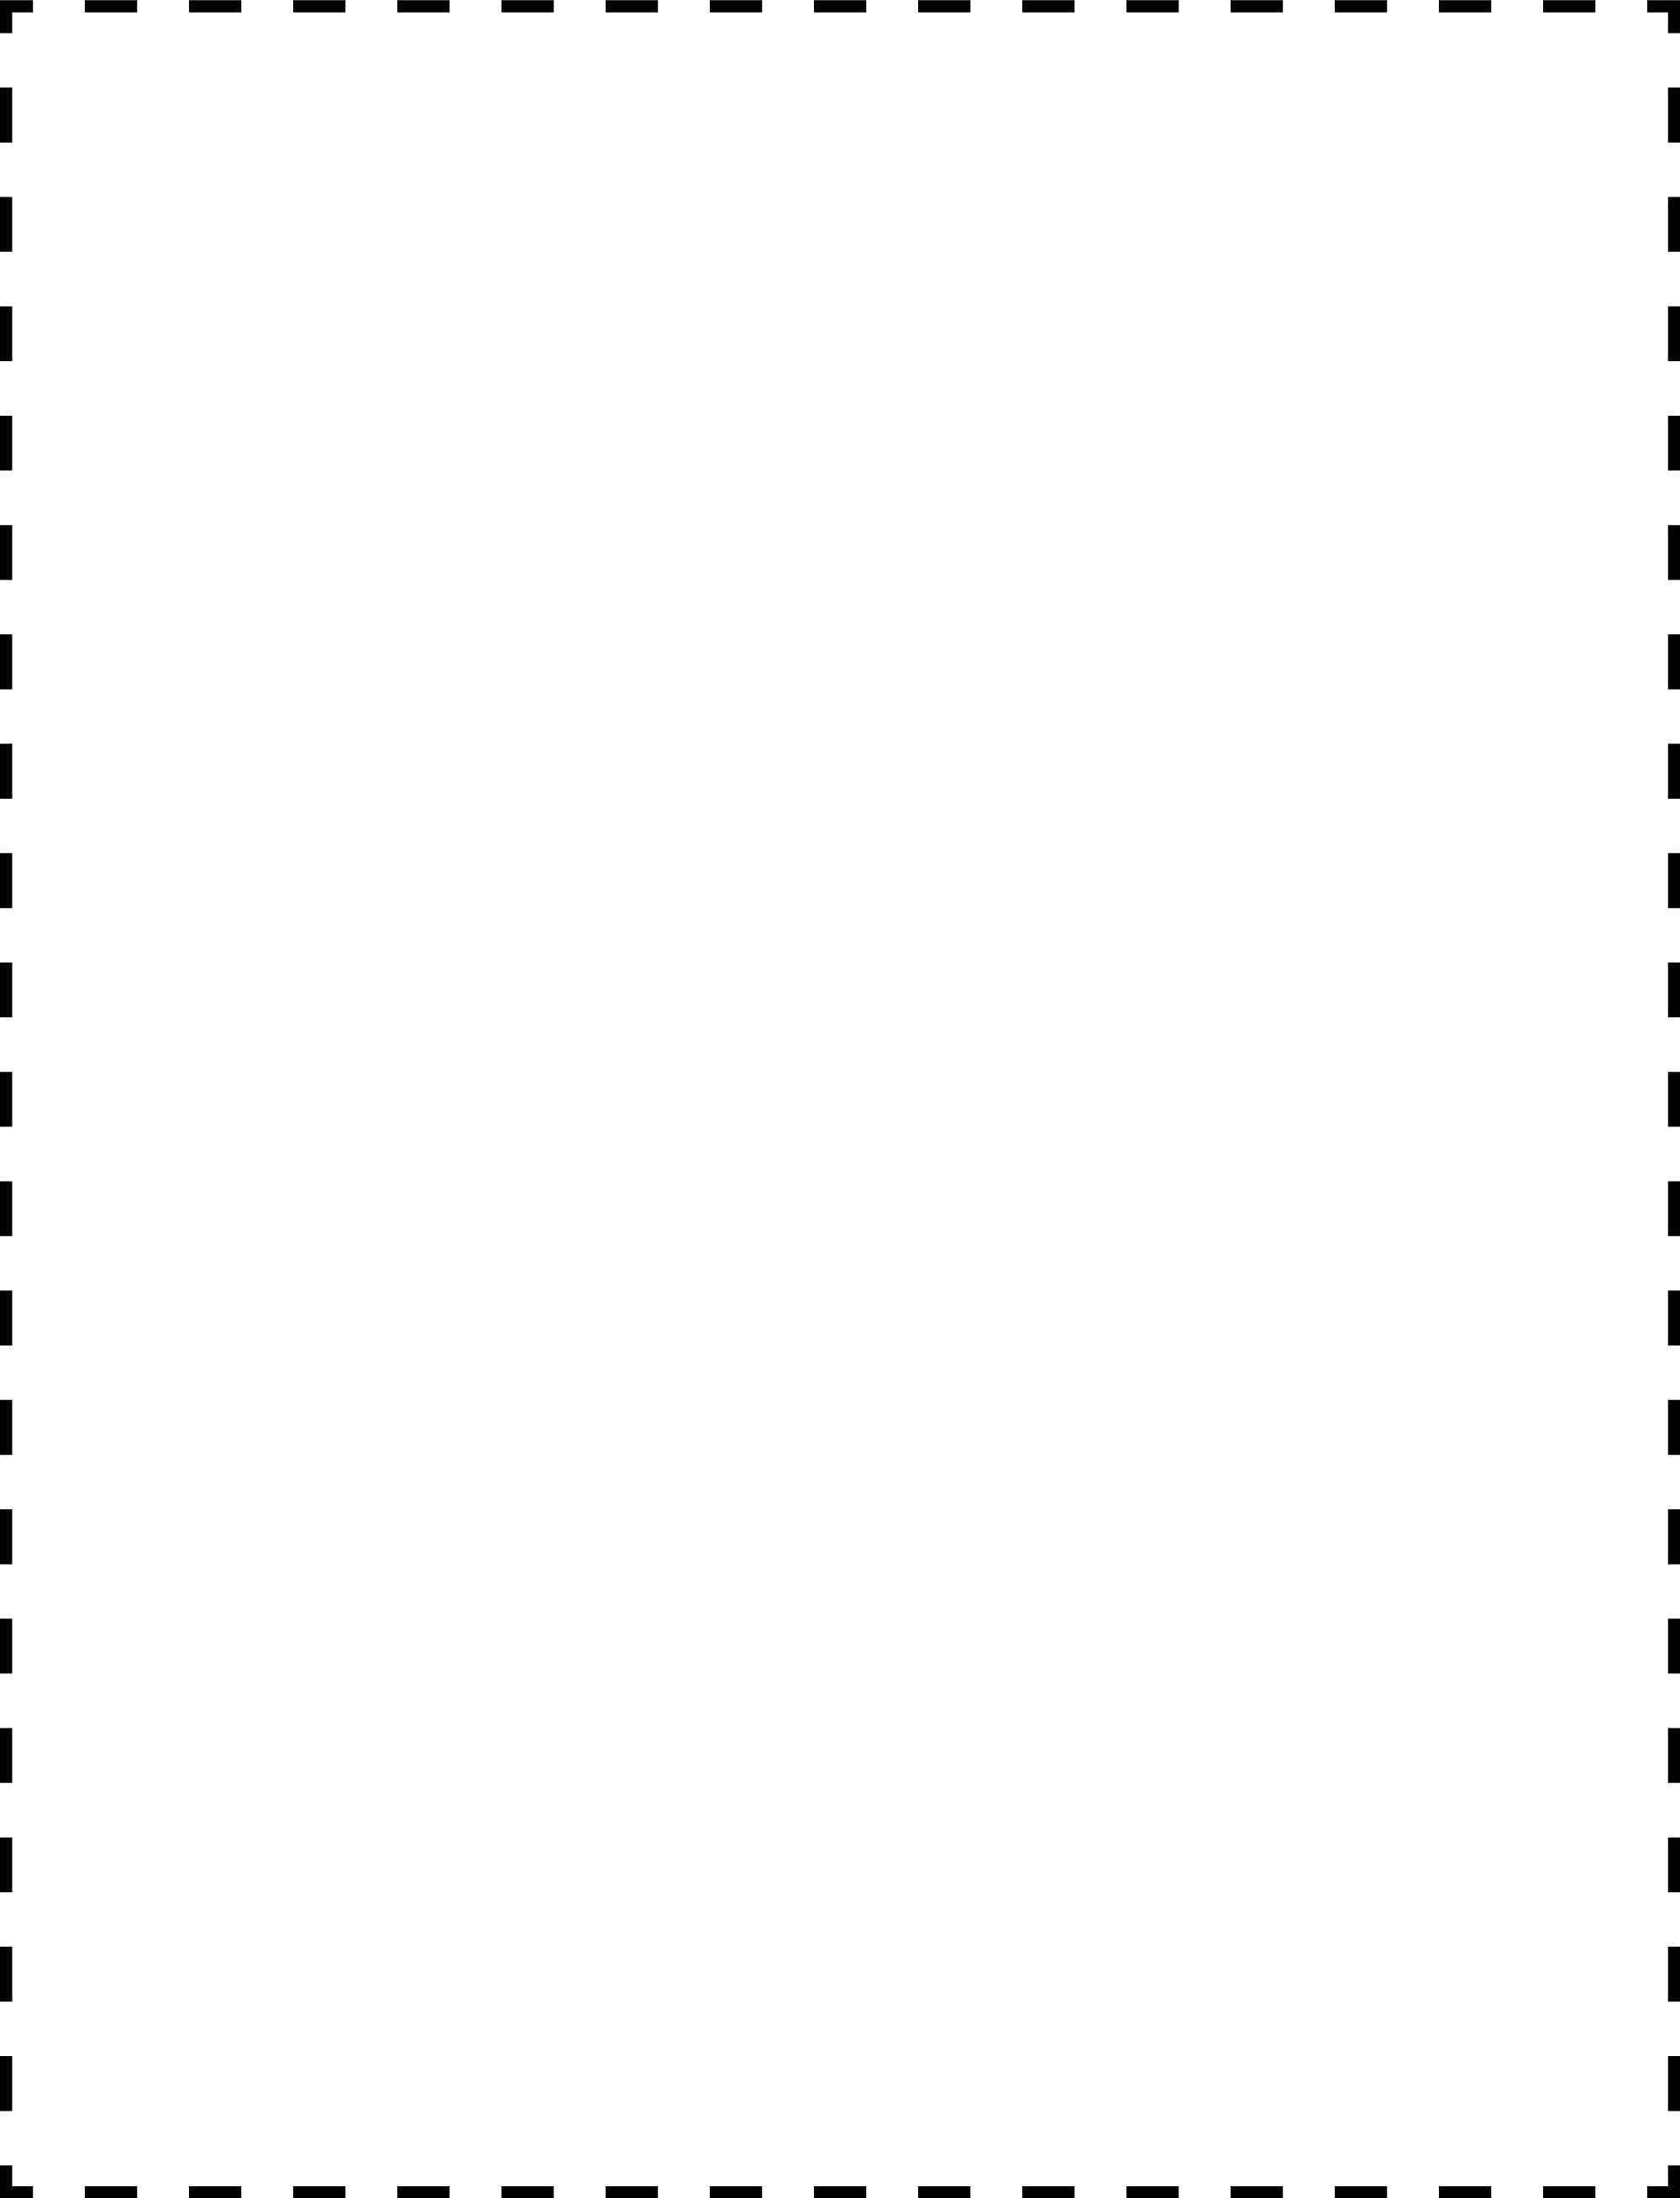 2393-coupon-outline-4x5-k.png